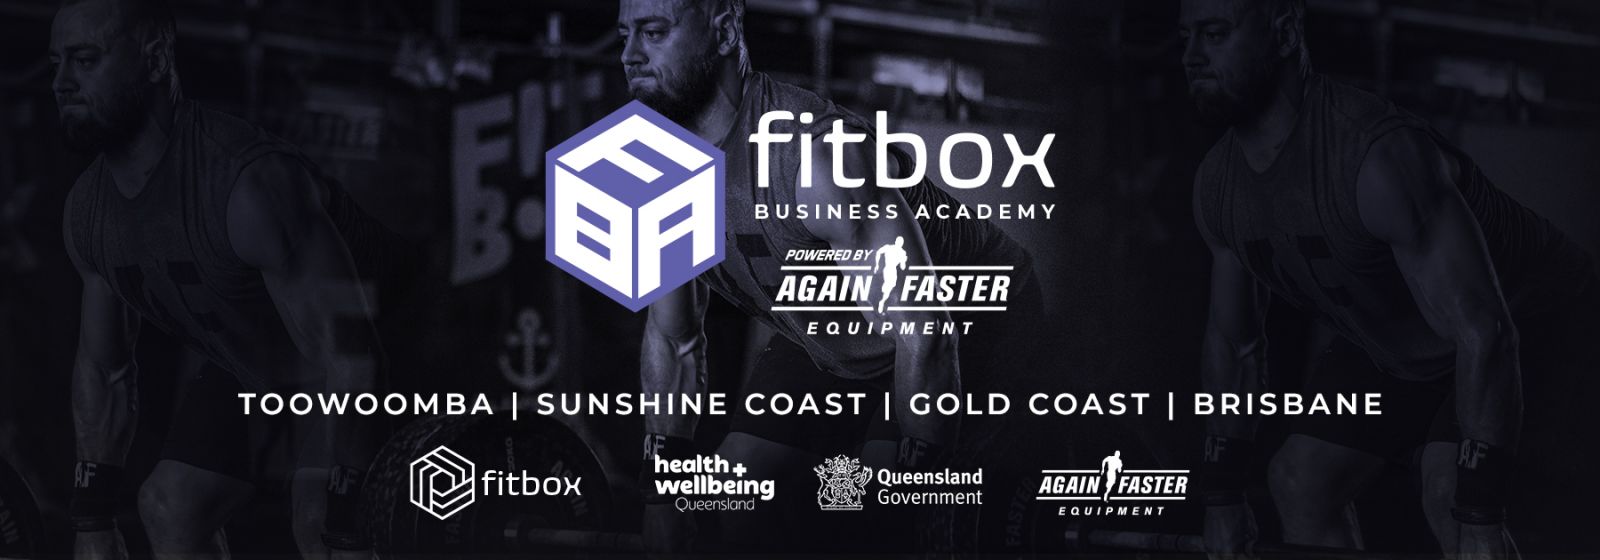 fitbox Business Academy - Registration 